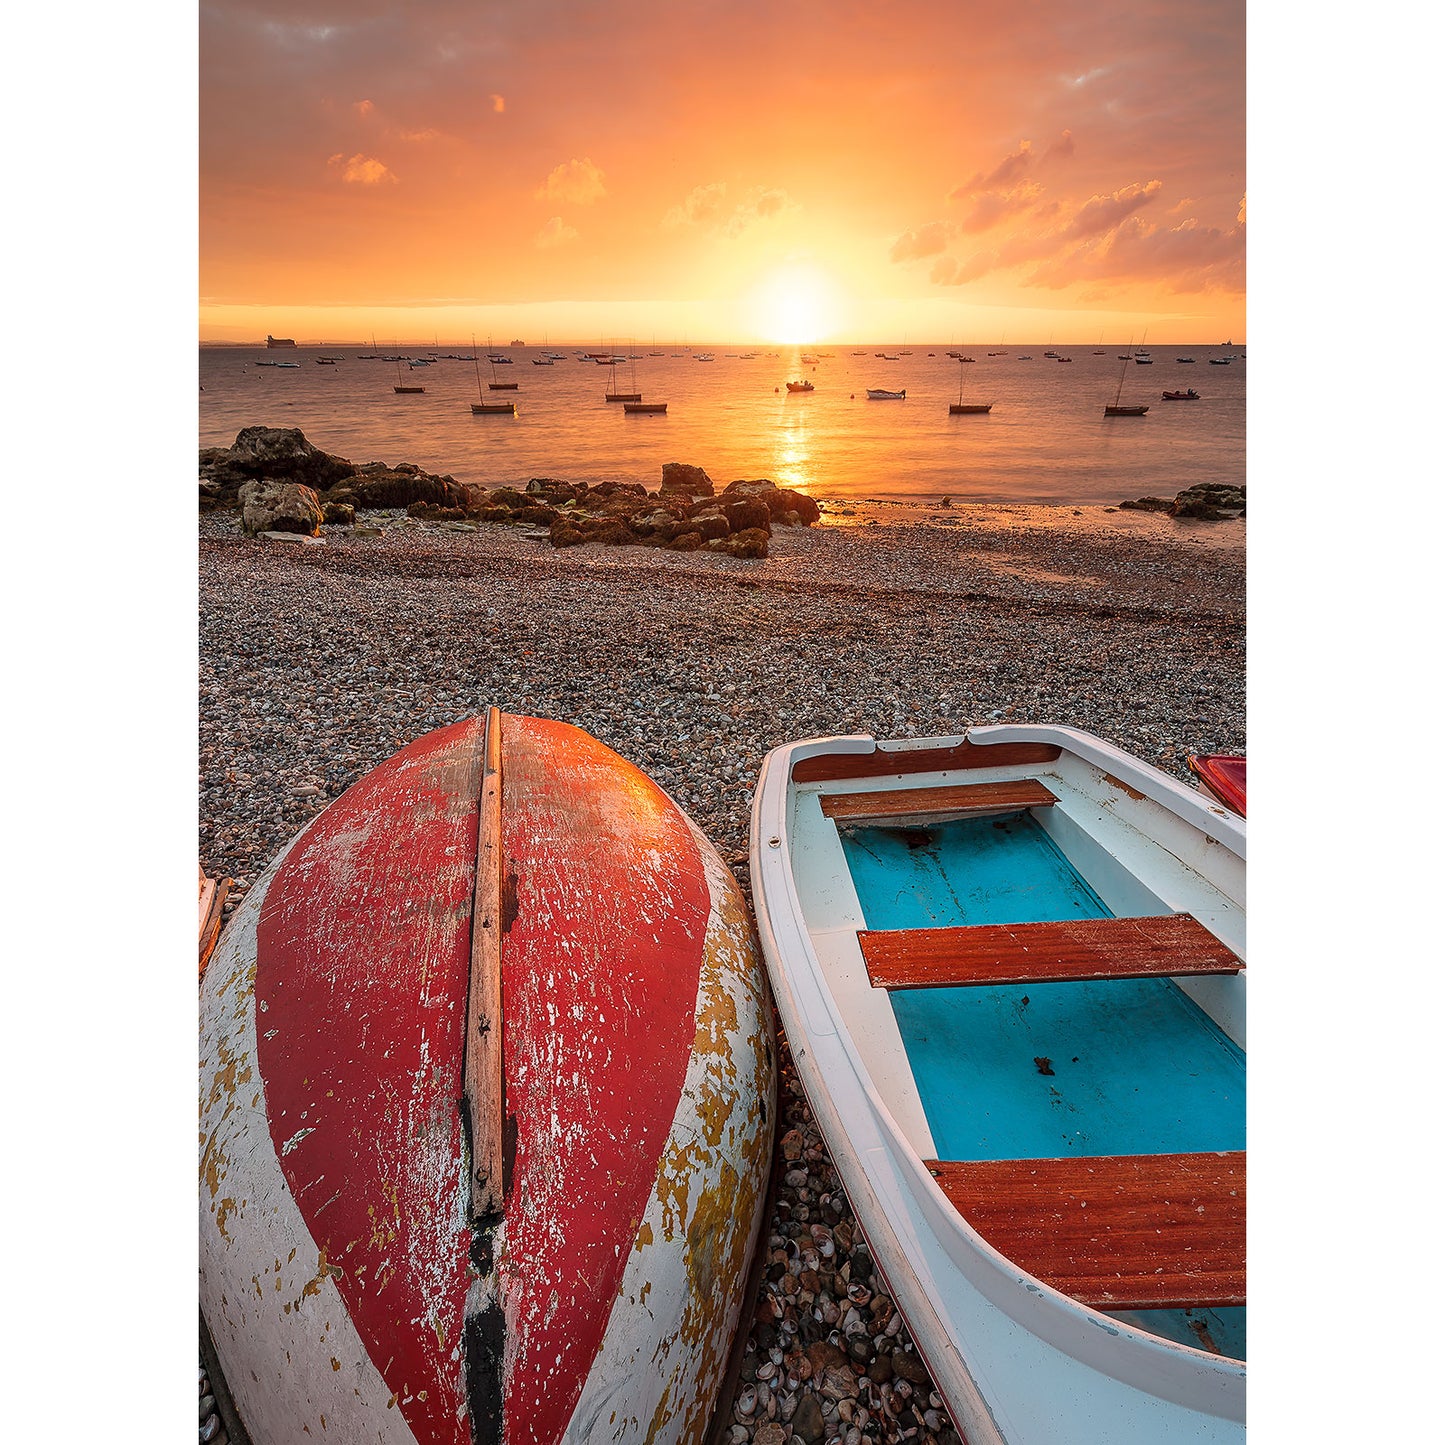 Sunset at the seaside with boats on the shore of Seaview by Available Light Photography.